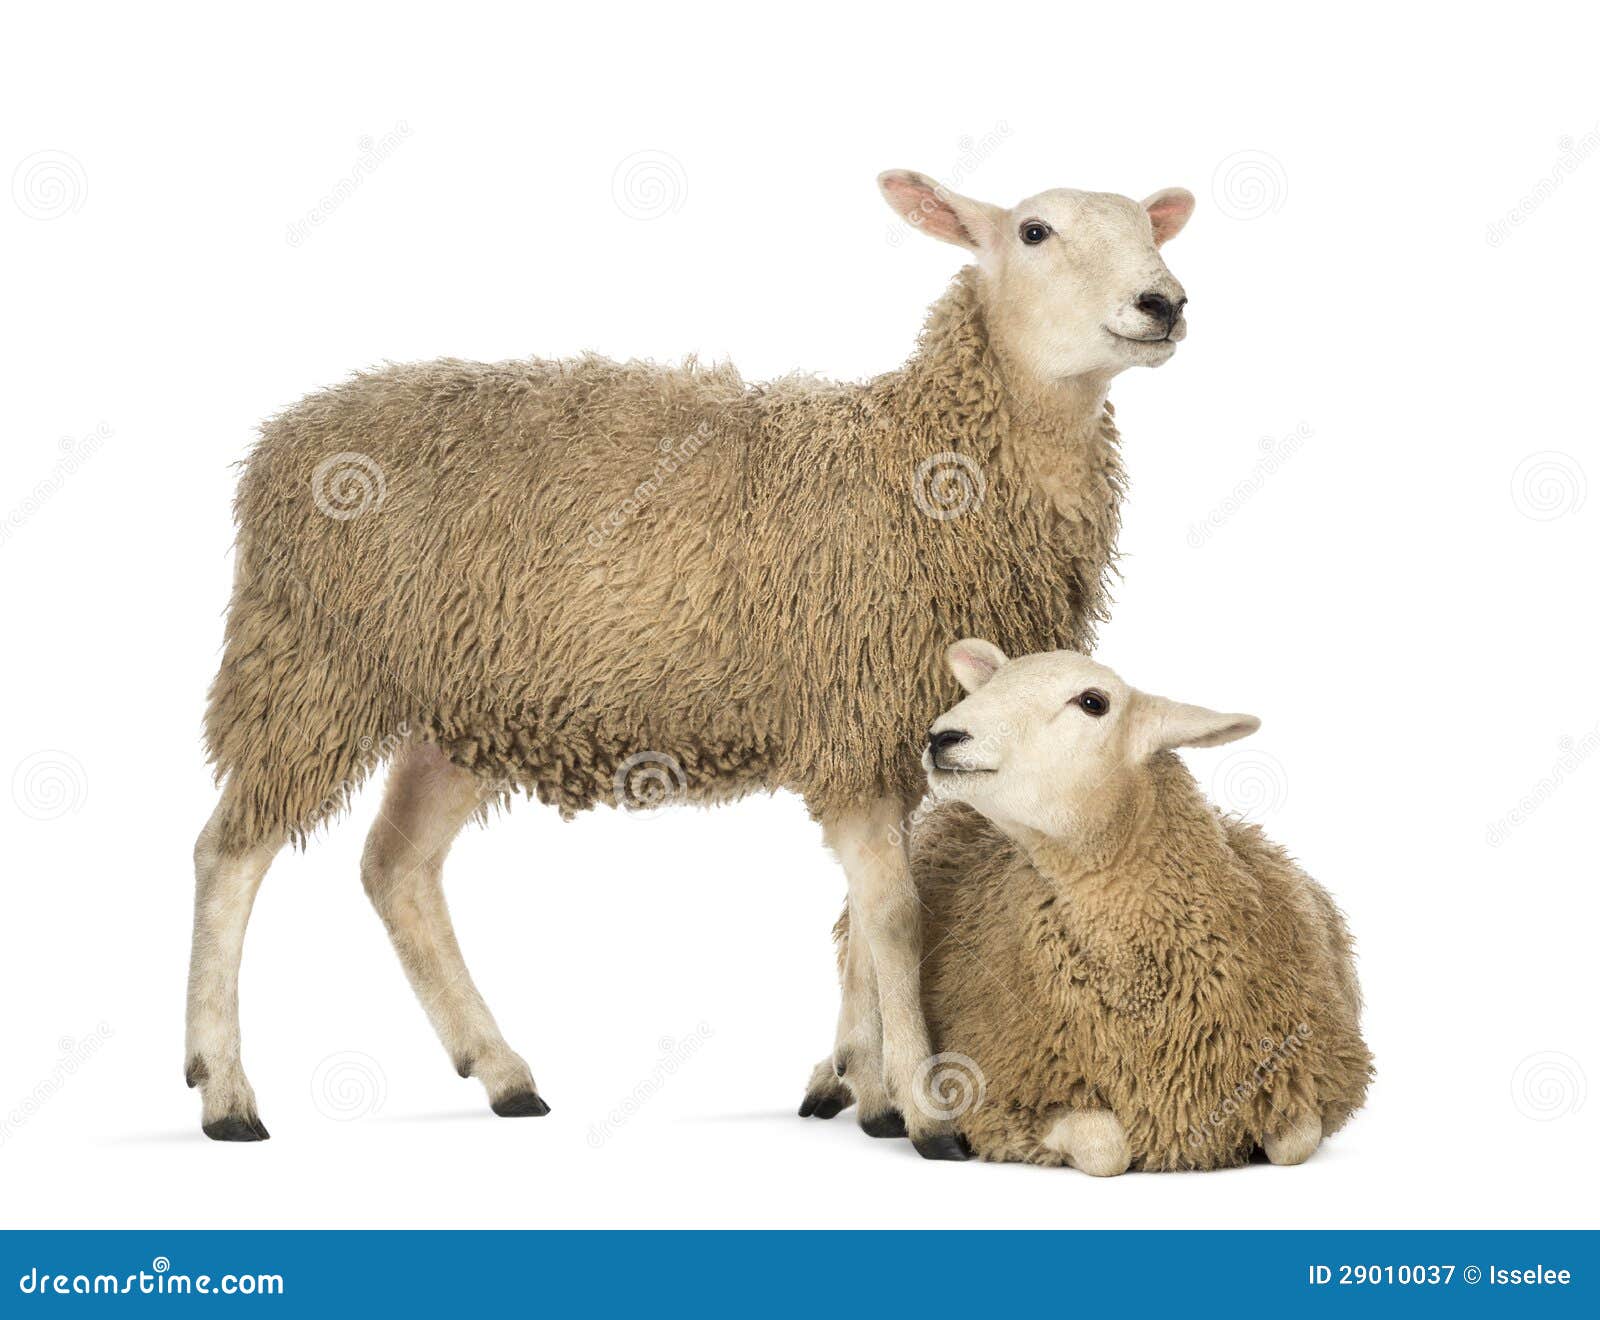 sheep lying in front of another standing